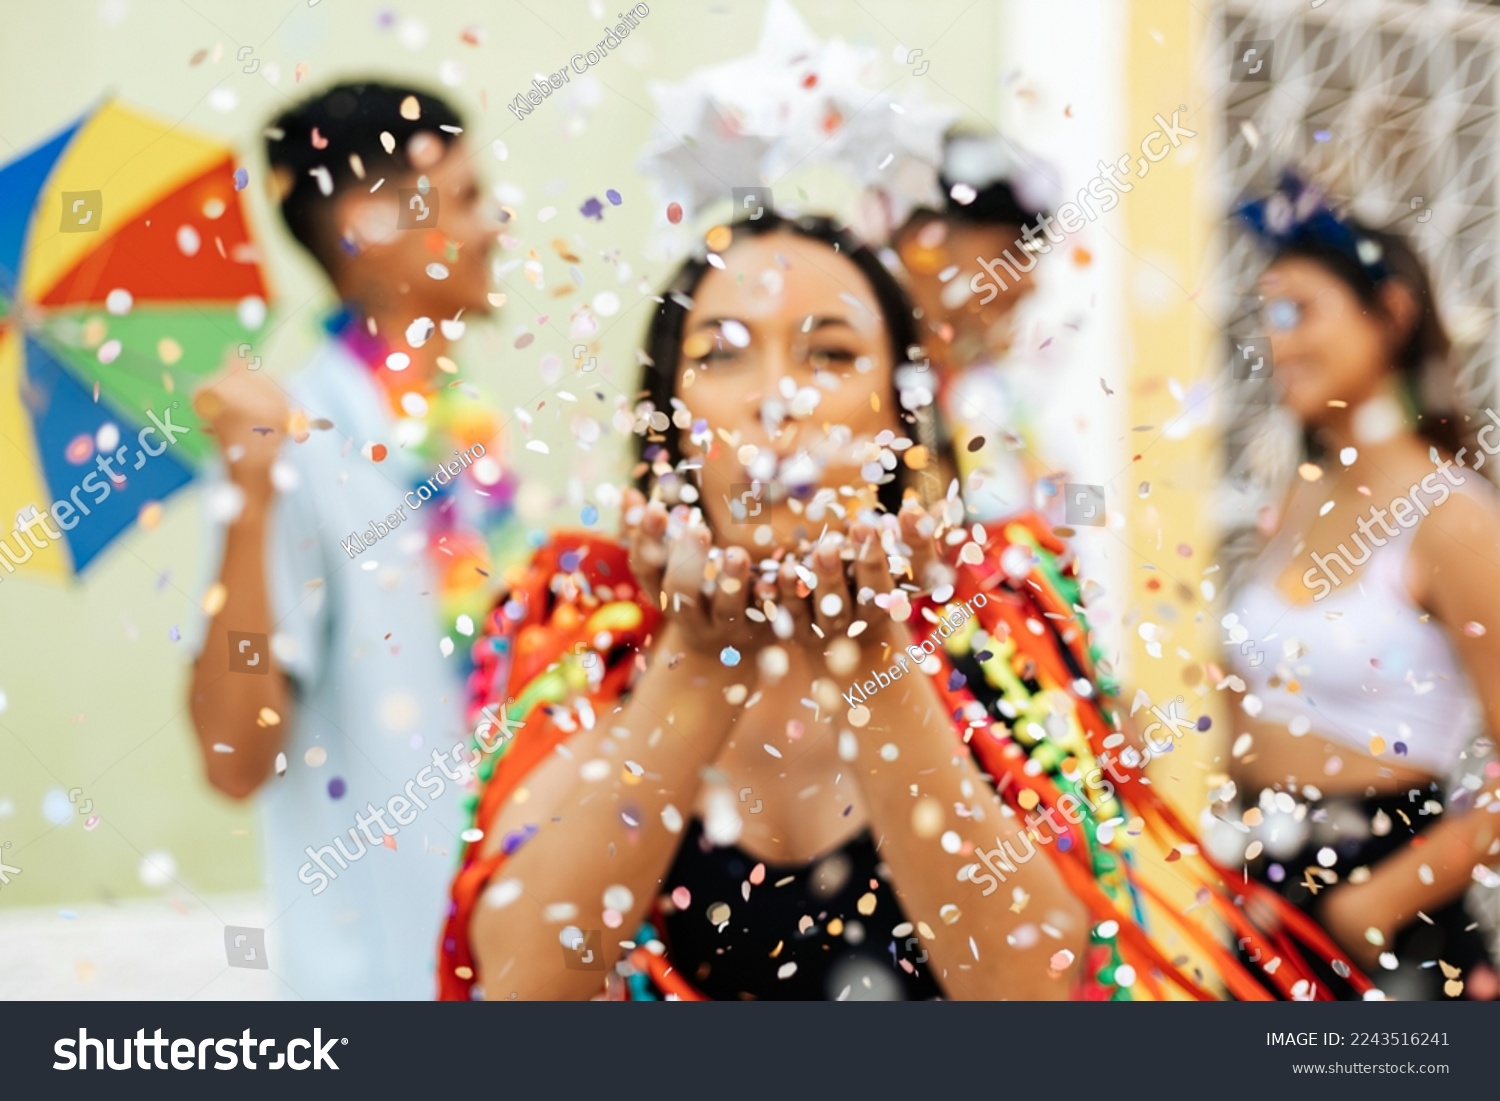 Brazilian Carnival. Group of friends celebrating carnival party. Selective focus of woman blowing confetti. #2243516241